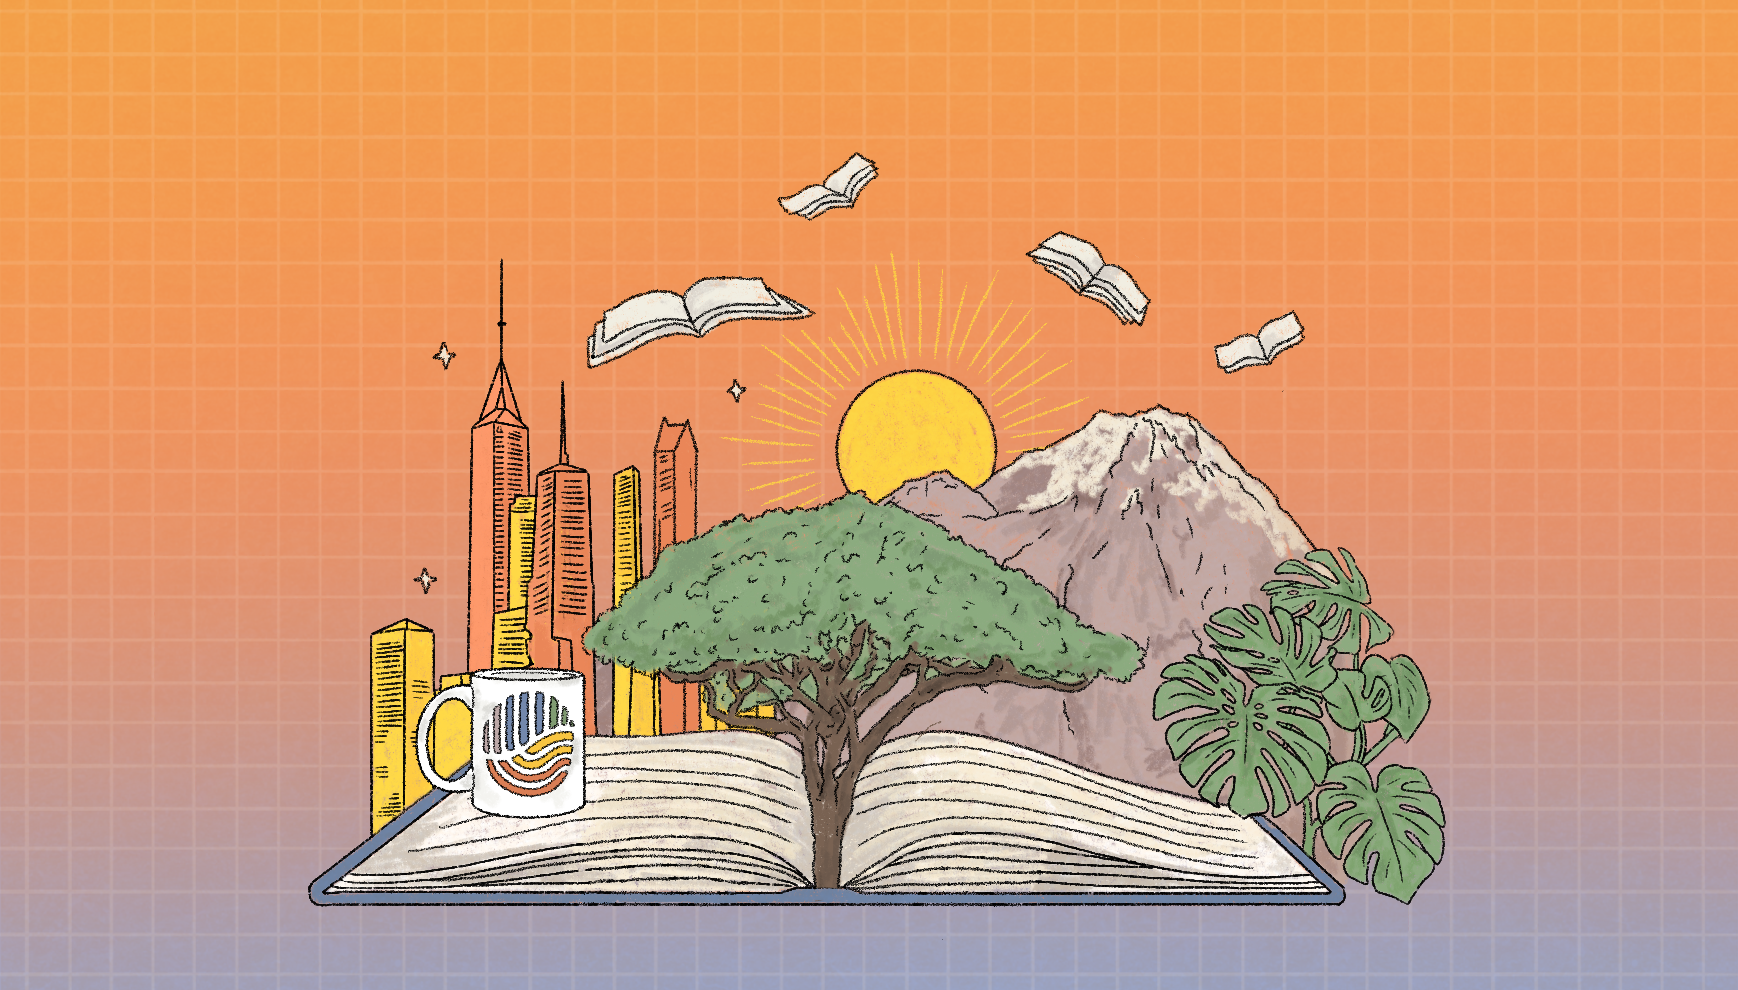 A book with a tree and a coffee cup resting on its cover with a mountan and cityscape in the background creating a warm and welcoming scene.